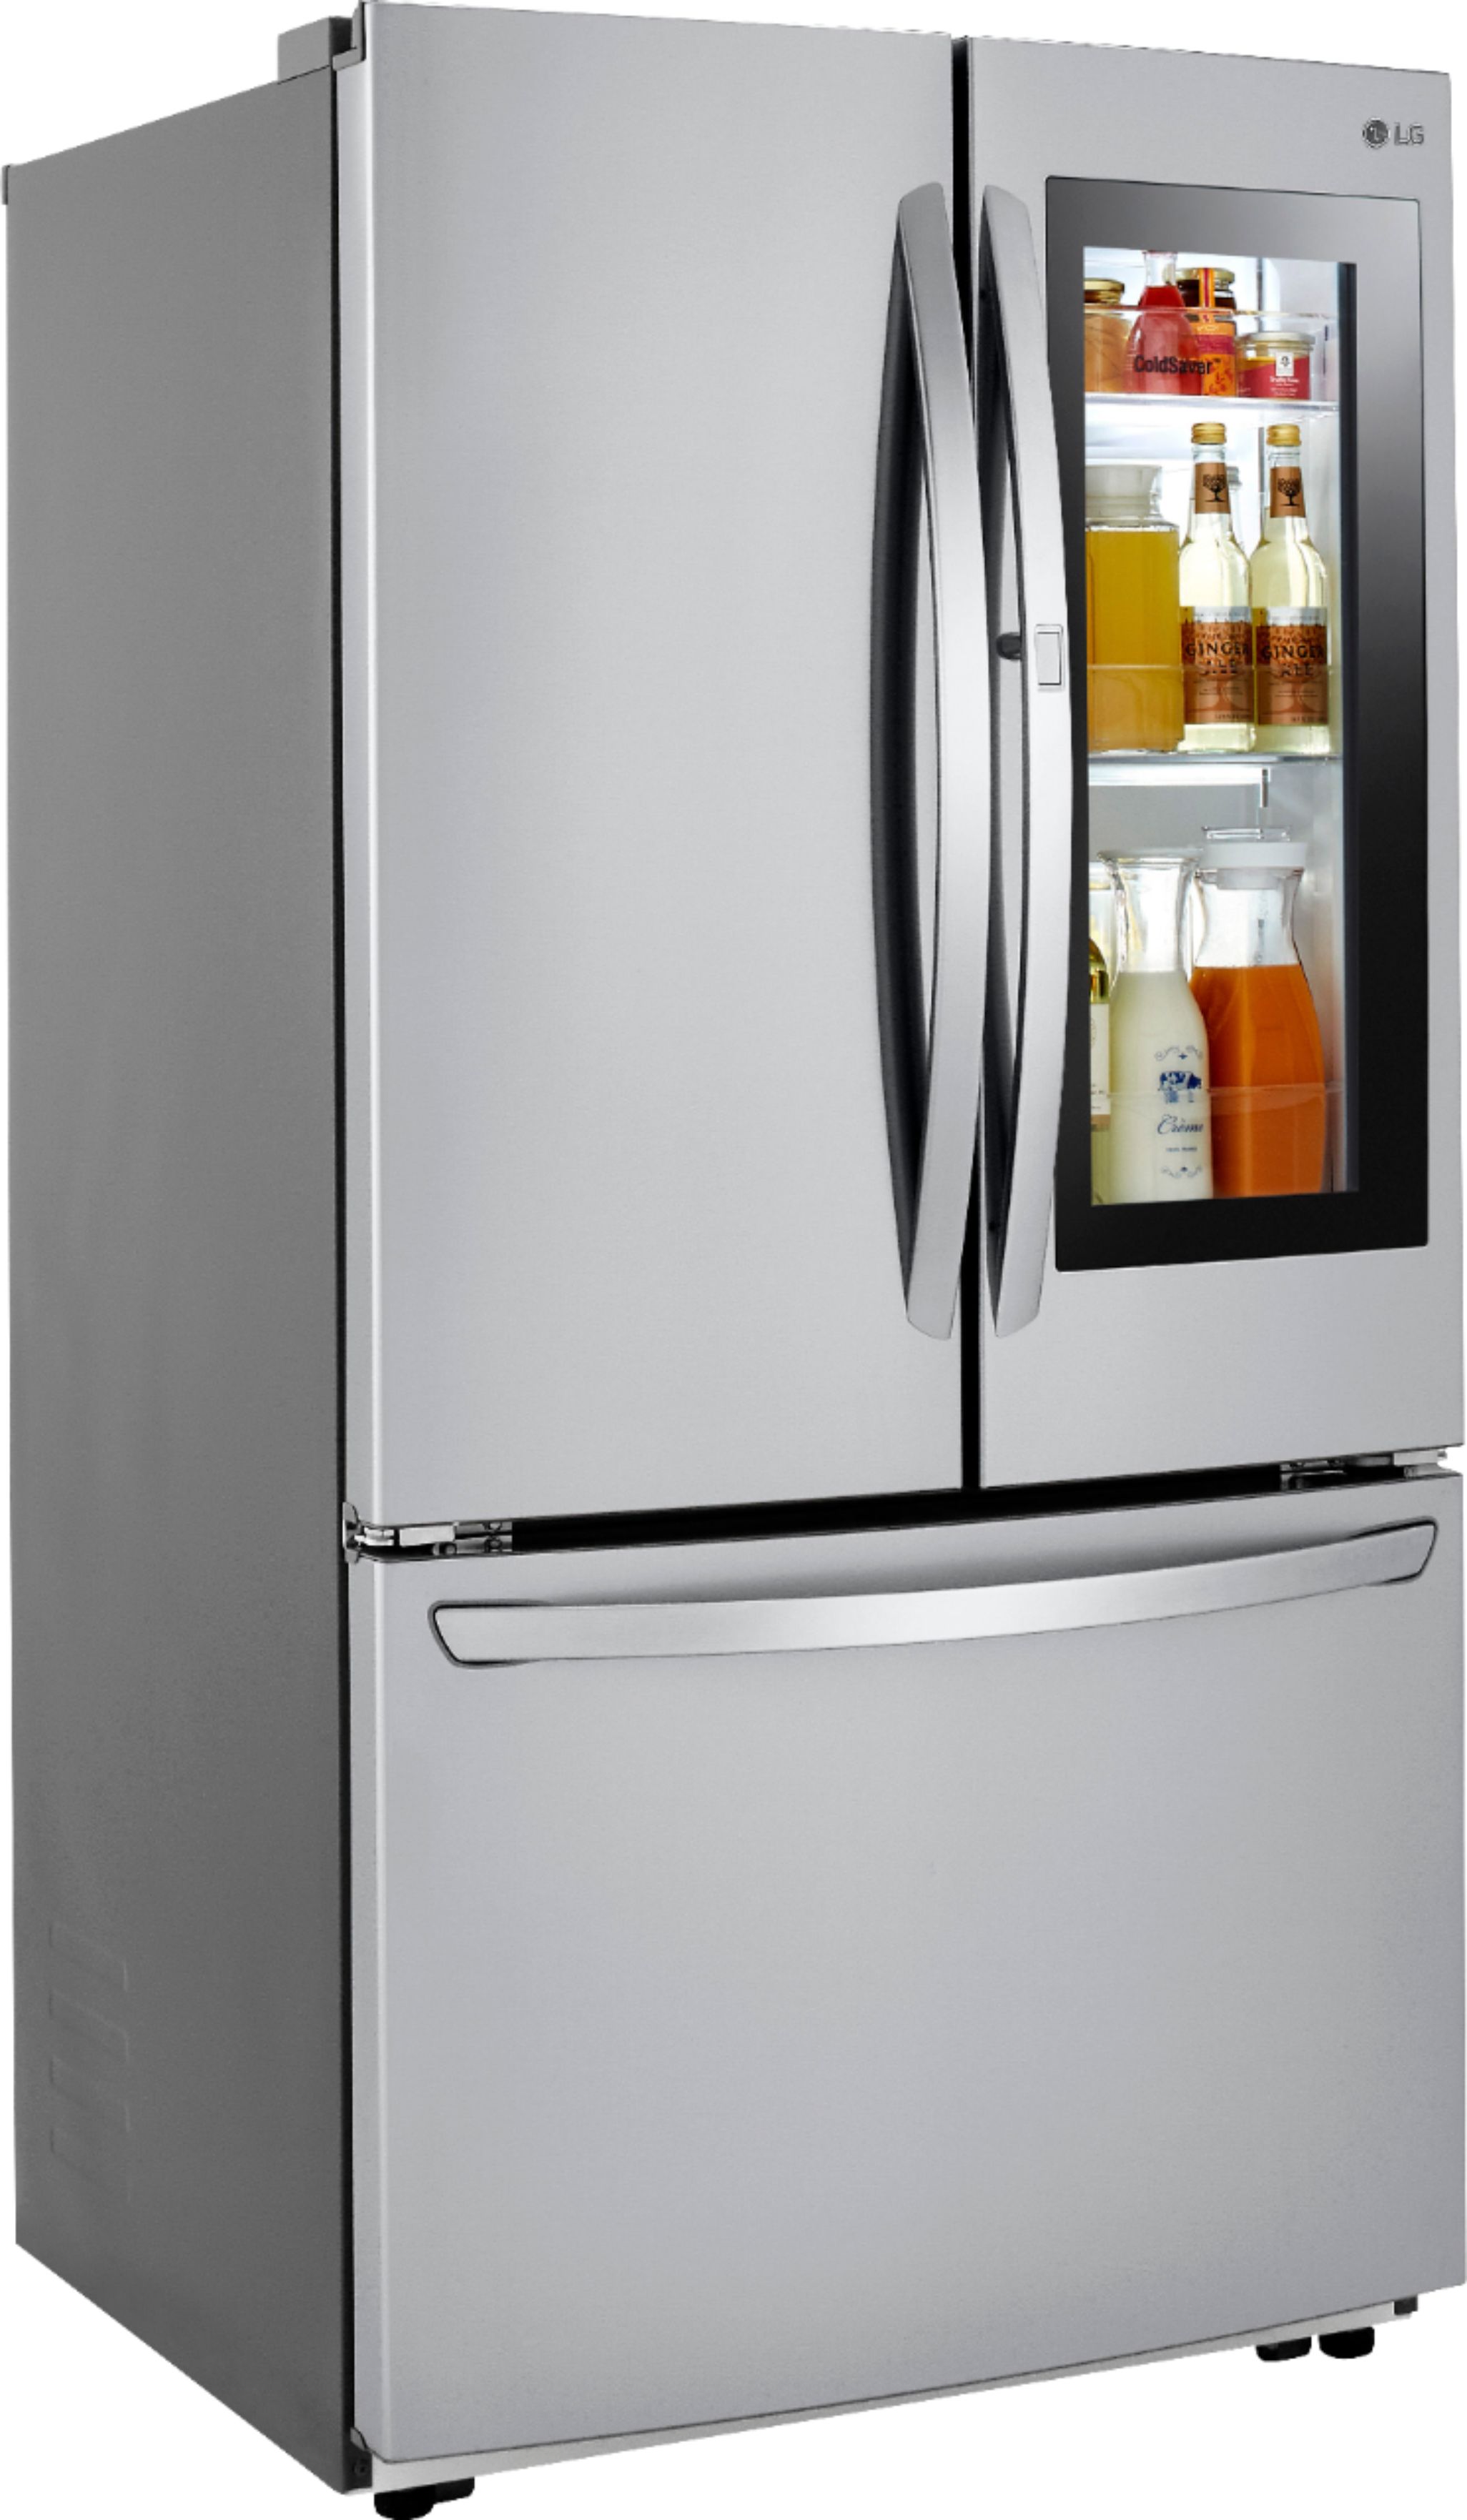 Angle View: LG - 27 Cu. Ft. InstaView French Door-in-Door Refrigerator with Ice Maker - Stainless steel